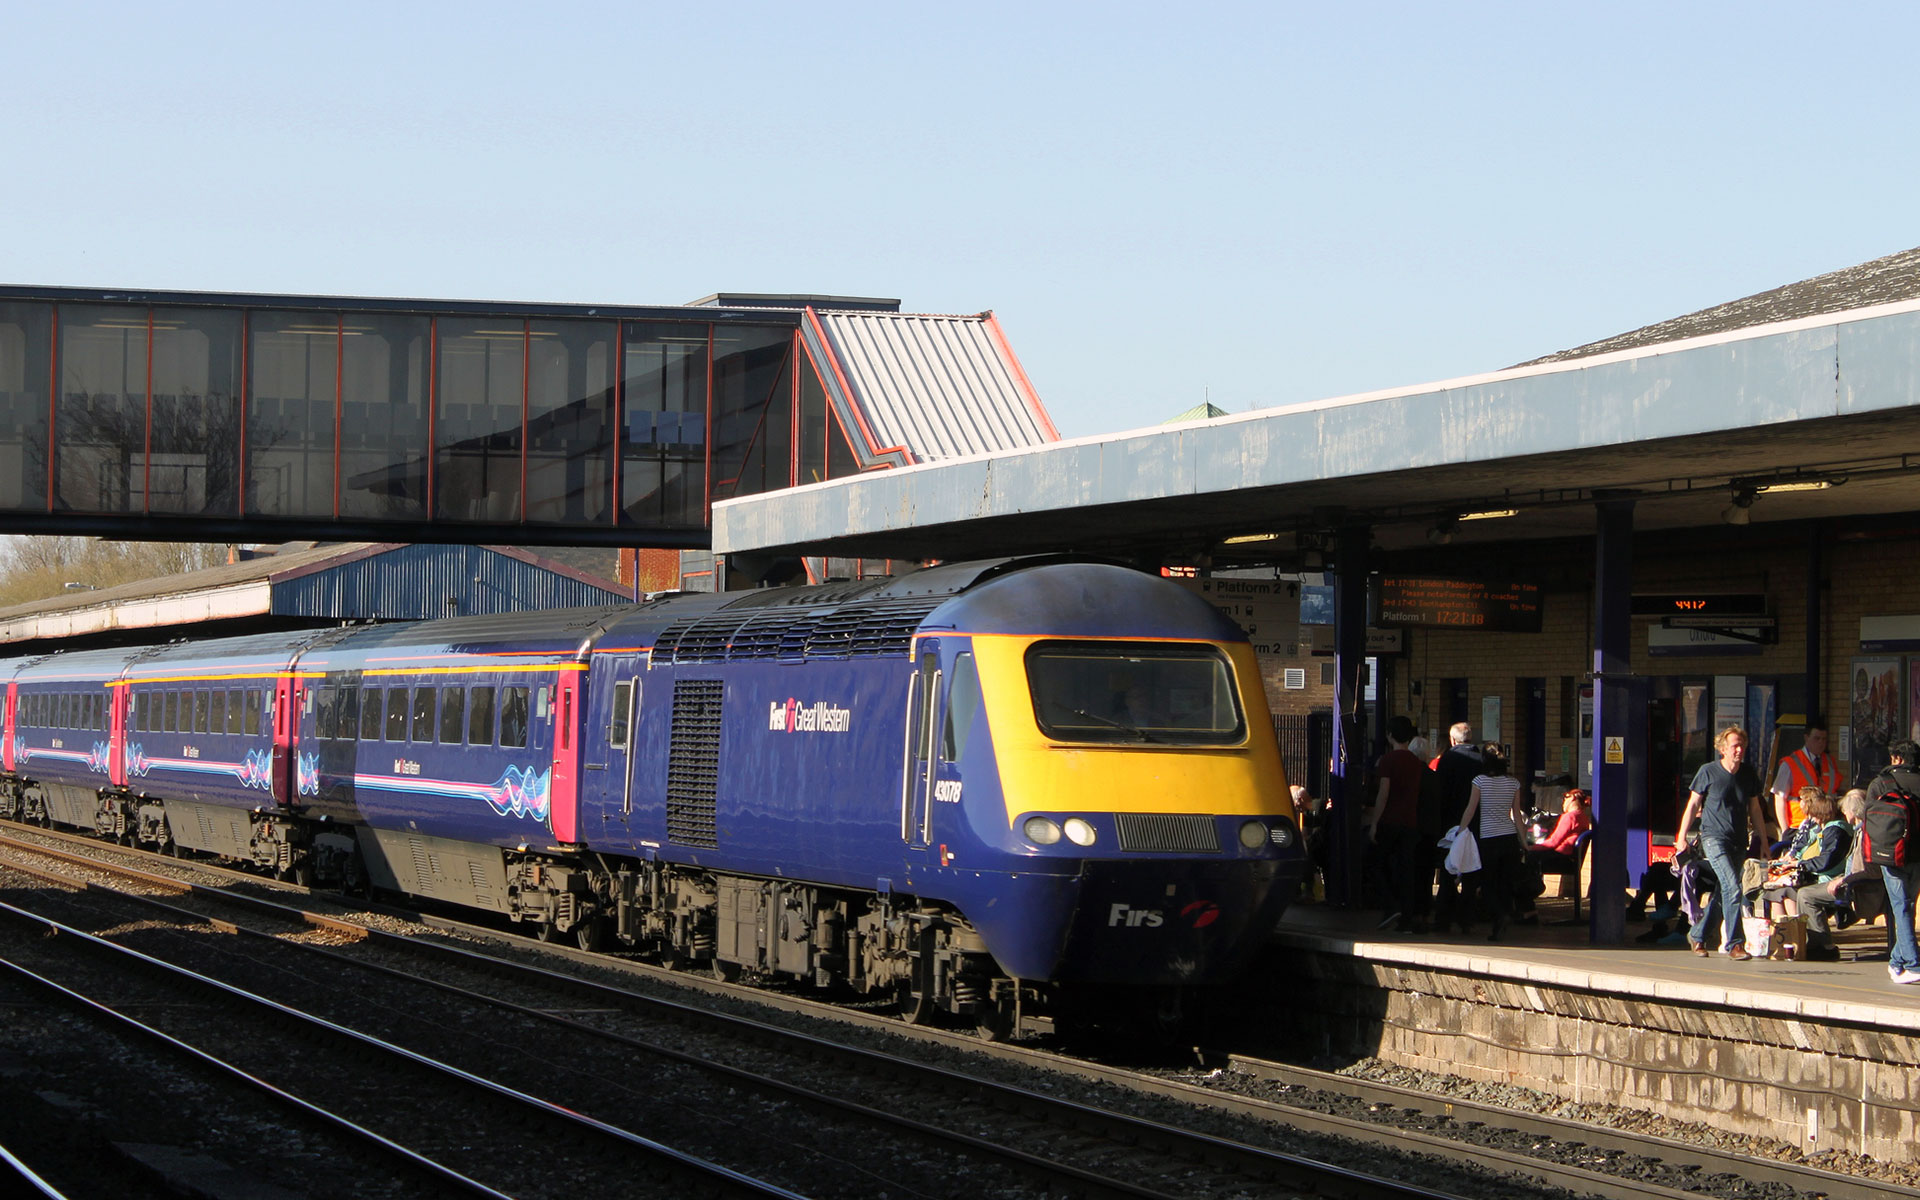 First Great Western's high-speed trains are less likely to be overcrowded on the Oxford to London line than the local services on the same route (photo © Georgesixth).